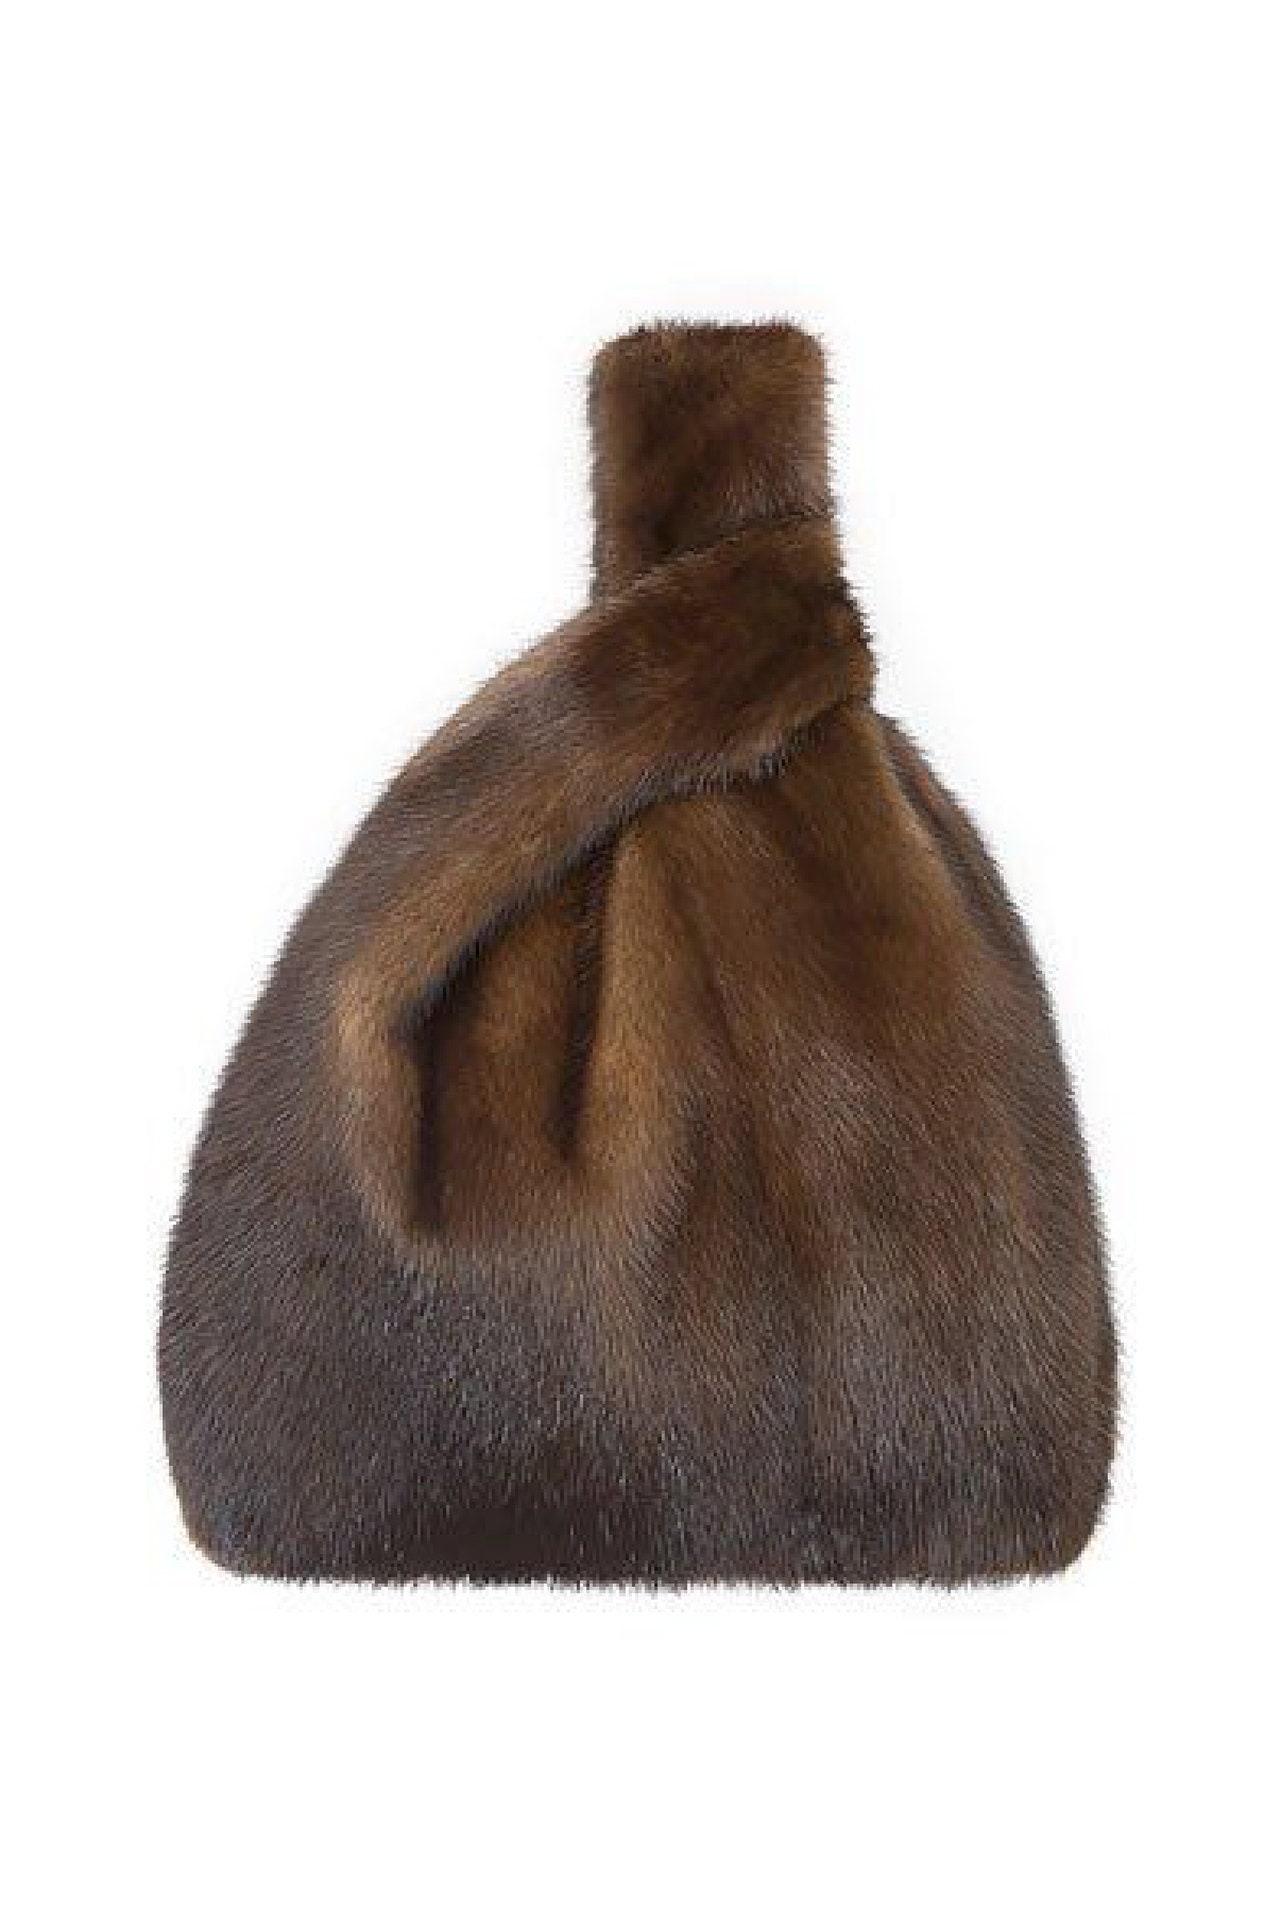 Large Mink Purse – The Fur And Leather Centre